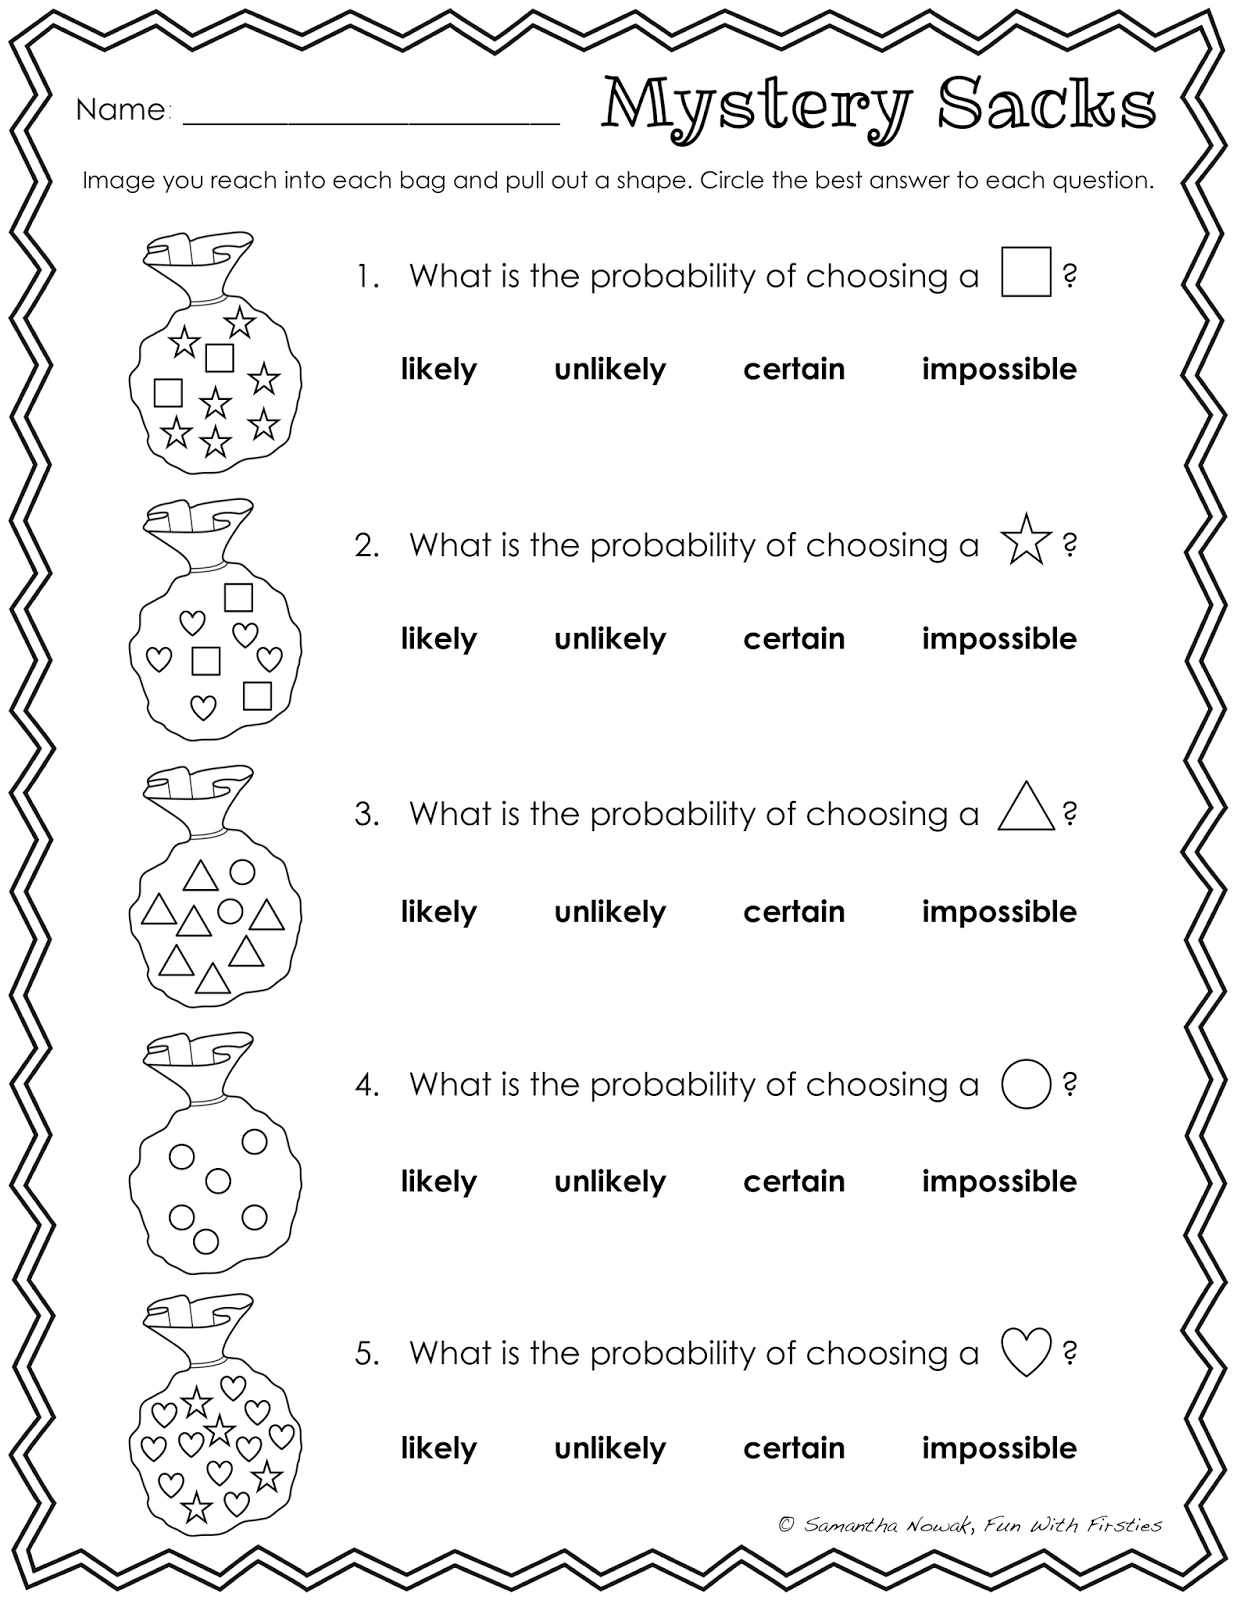 our-probability-unit-worksheets-activities-lessons-and-free-printable-probability